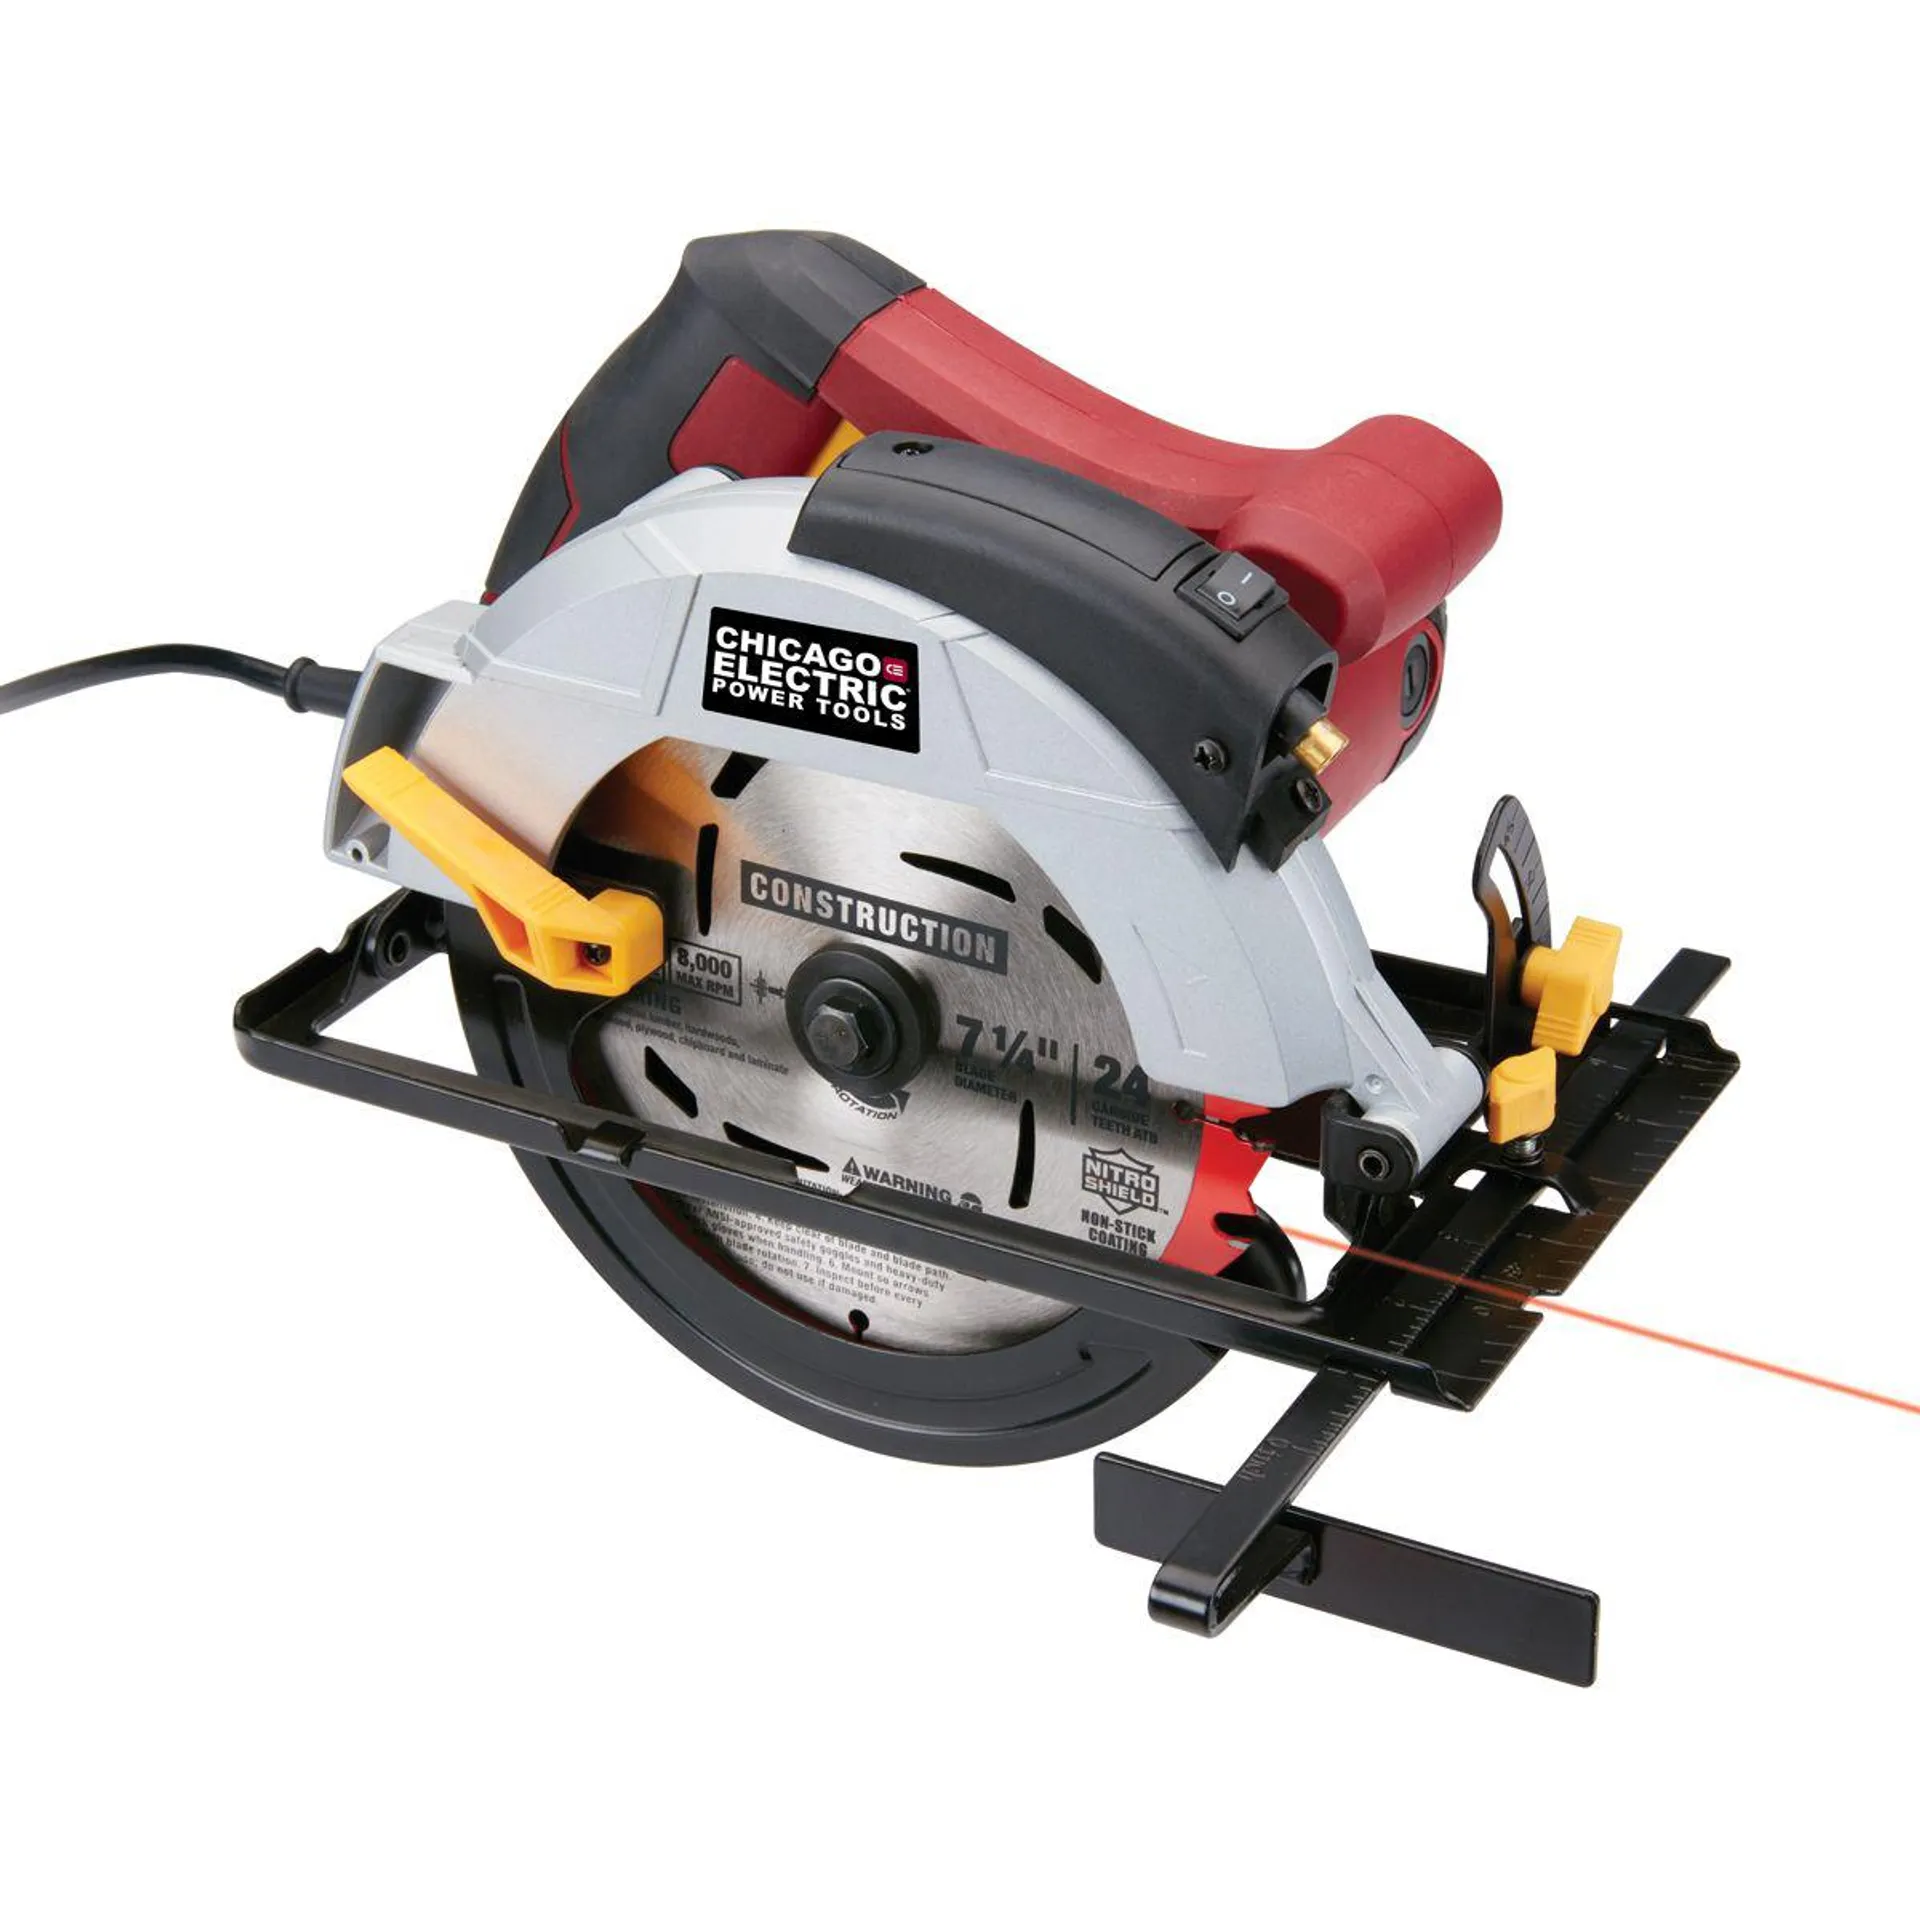 12 Amp 7-1/4 in. Circular Saw with Laser Guide System